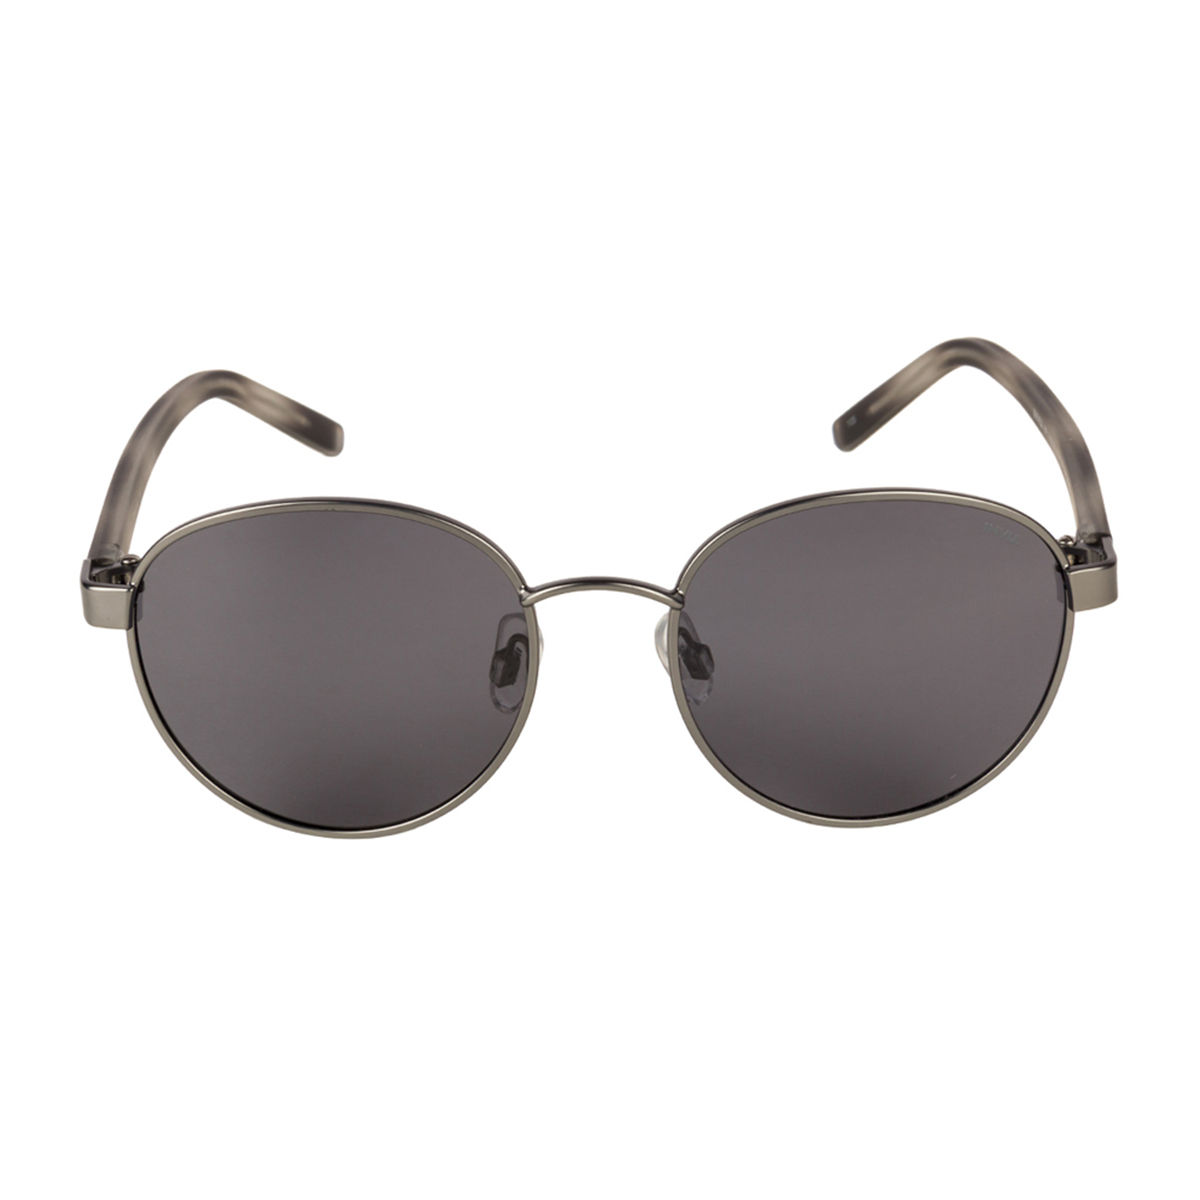 Invu Sunglasses Round With Grey Lens For Men